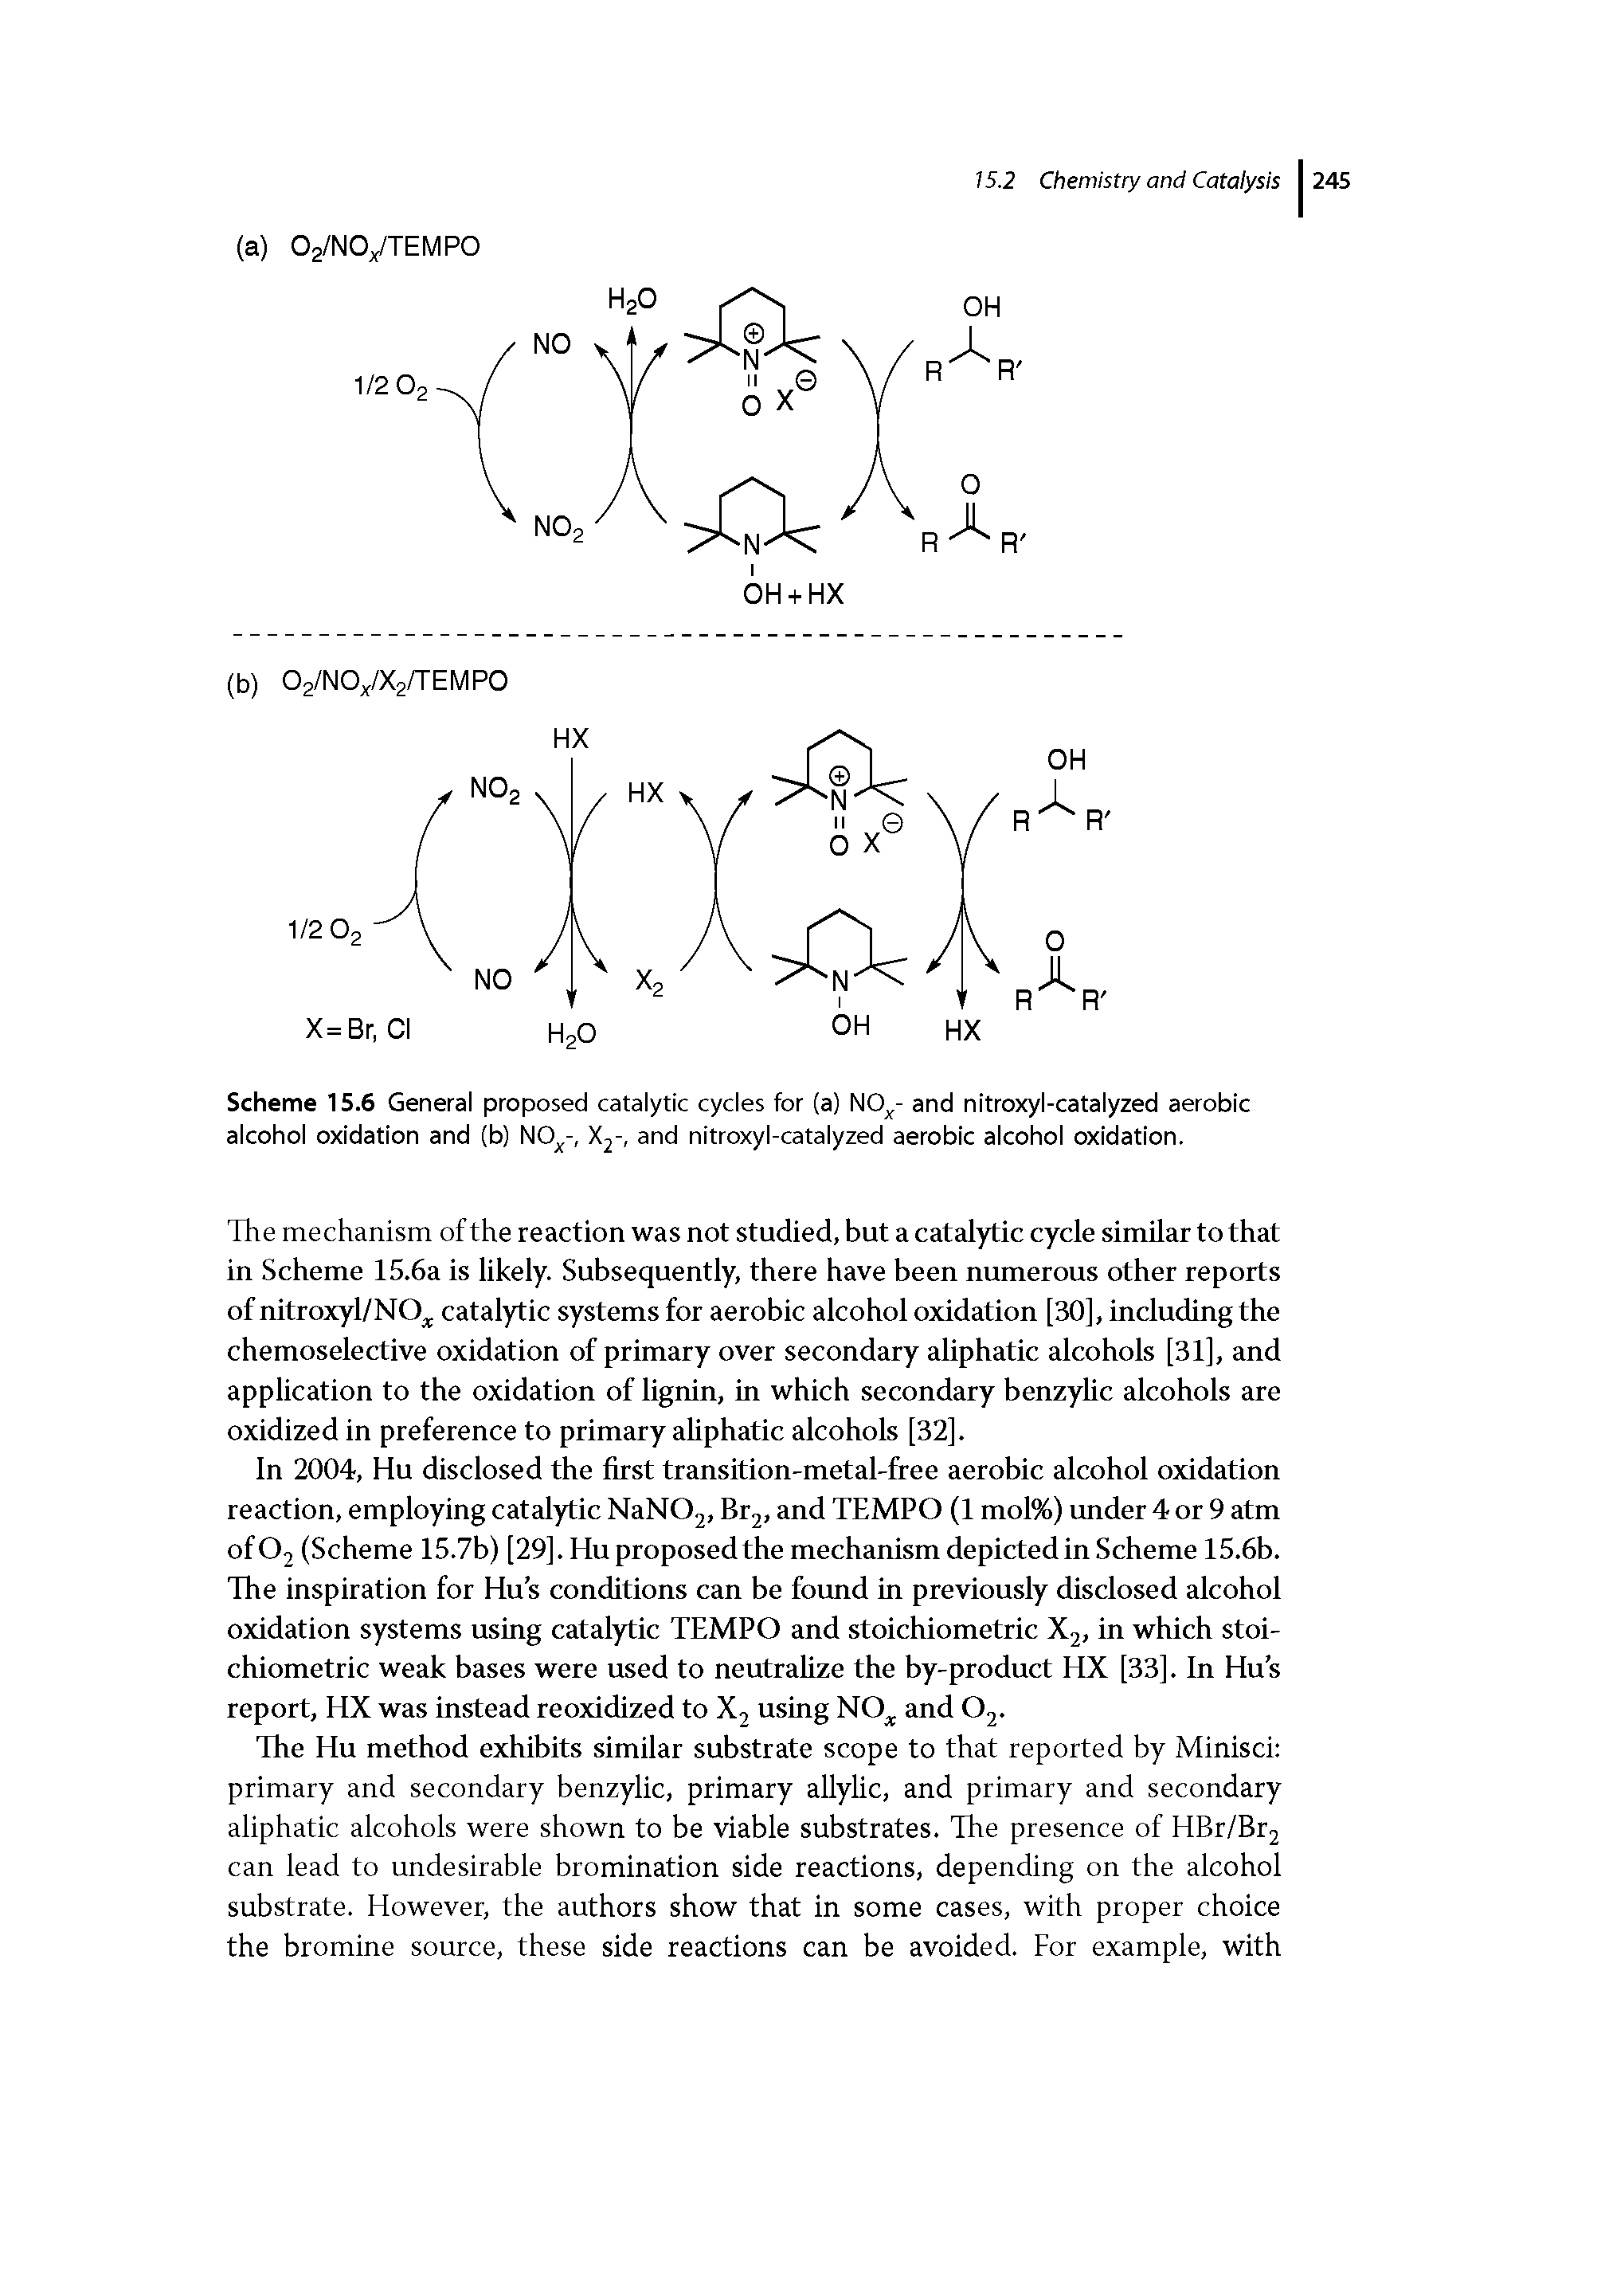 Scheme 15.6 General proposed catalytic cycles for (a) NO - and nitroxyl-catalyzed aerobic alcohol oxidation and (b) NOj -, Xj-, and nitroxyl-catalyzed aerobic alcohol oxidation.